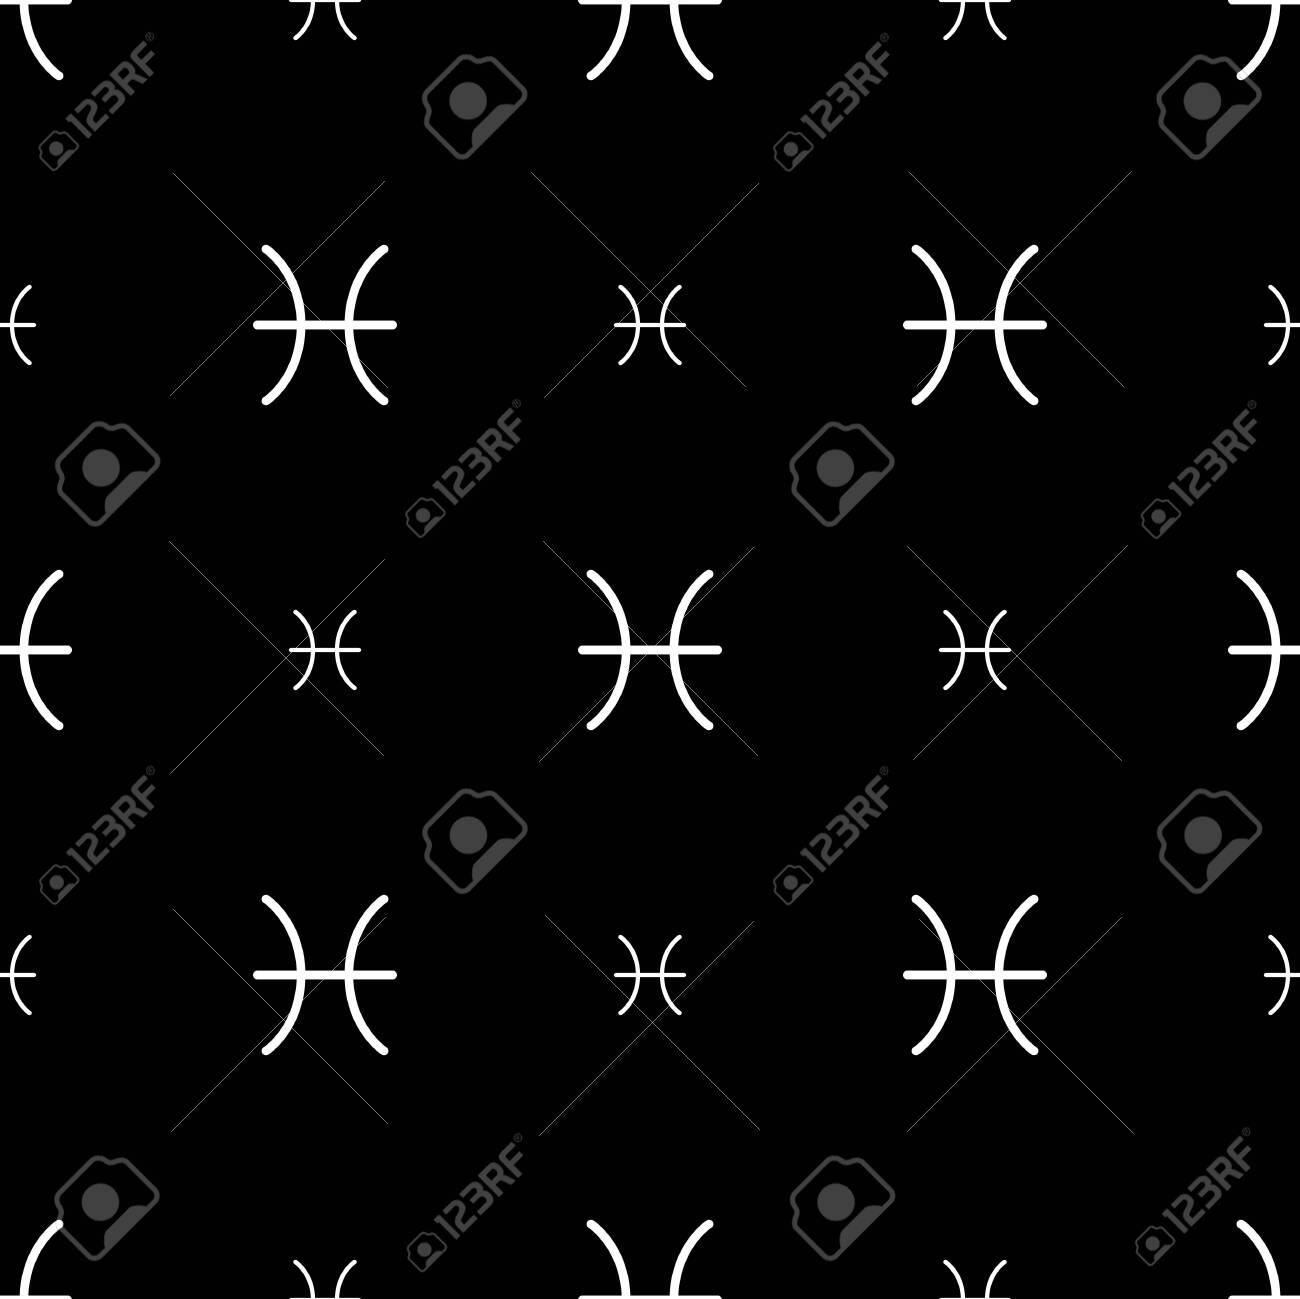 Pisces Zodiac Sign Horoscope Seamless Pattern Texture For